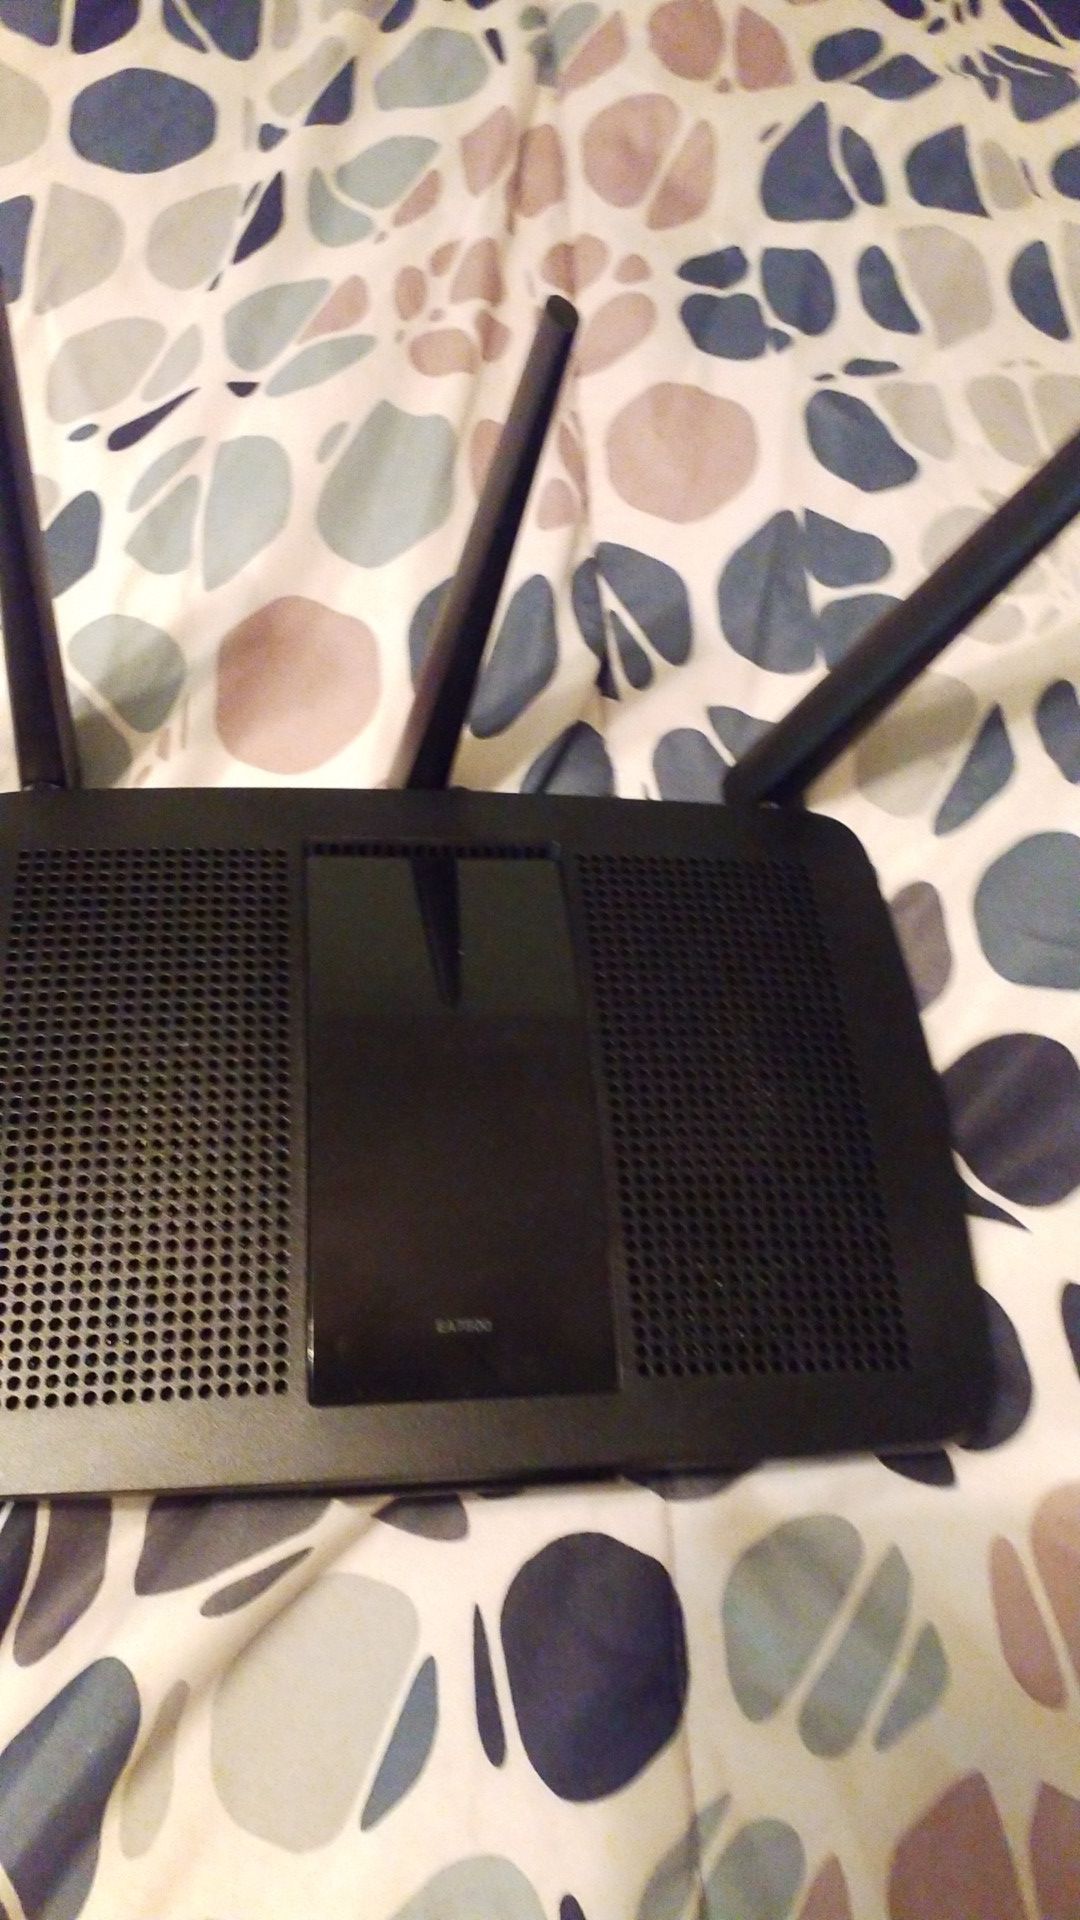 LINKSYS ROUTER EA7500